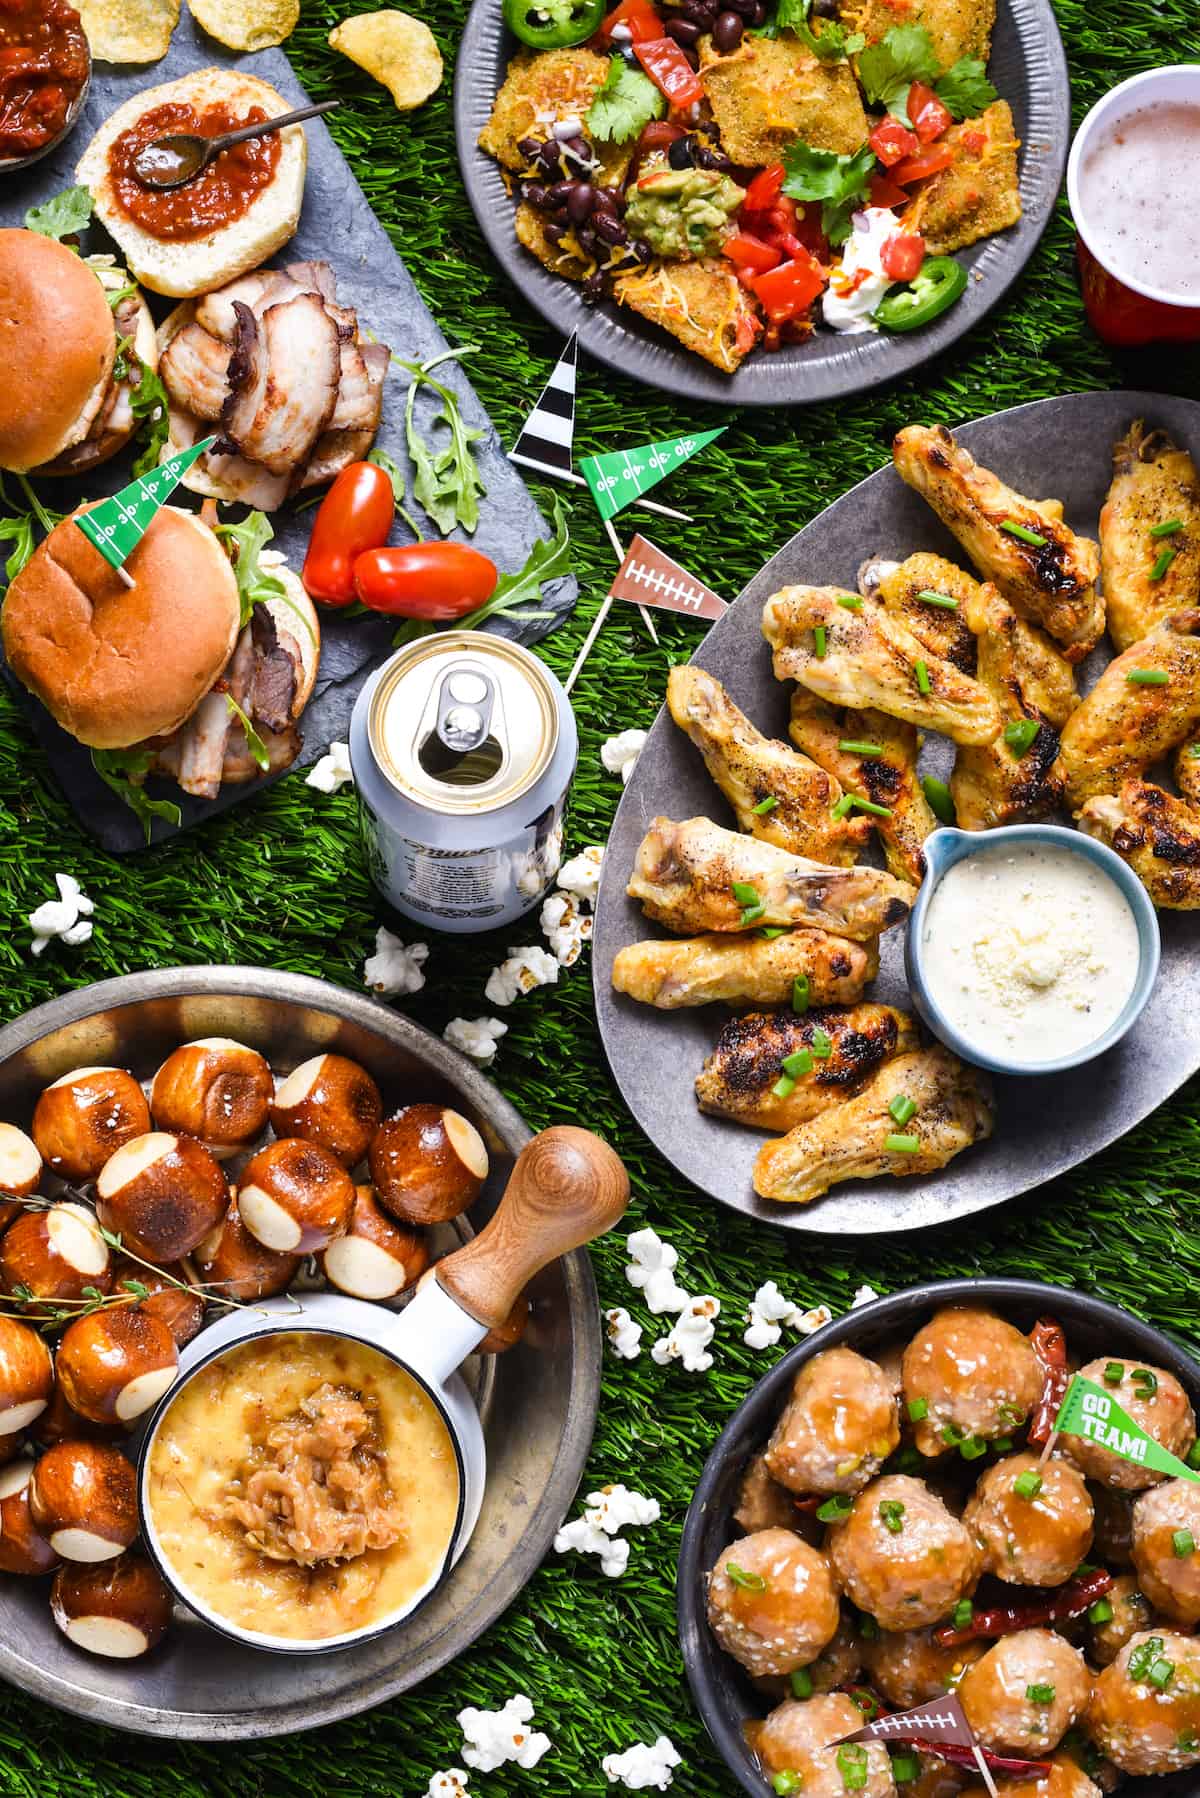 Astroturf topped with various types of tailgating food, including sliders, nachos, chicken wings cheese dip and meatballs.